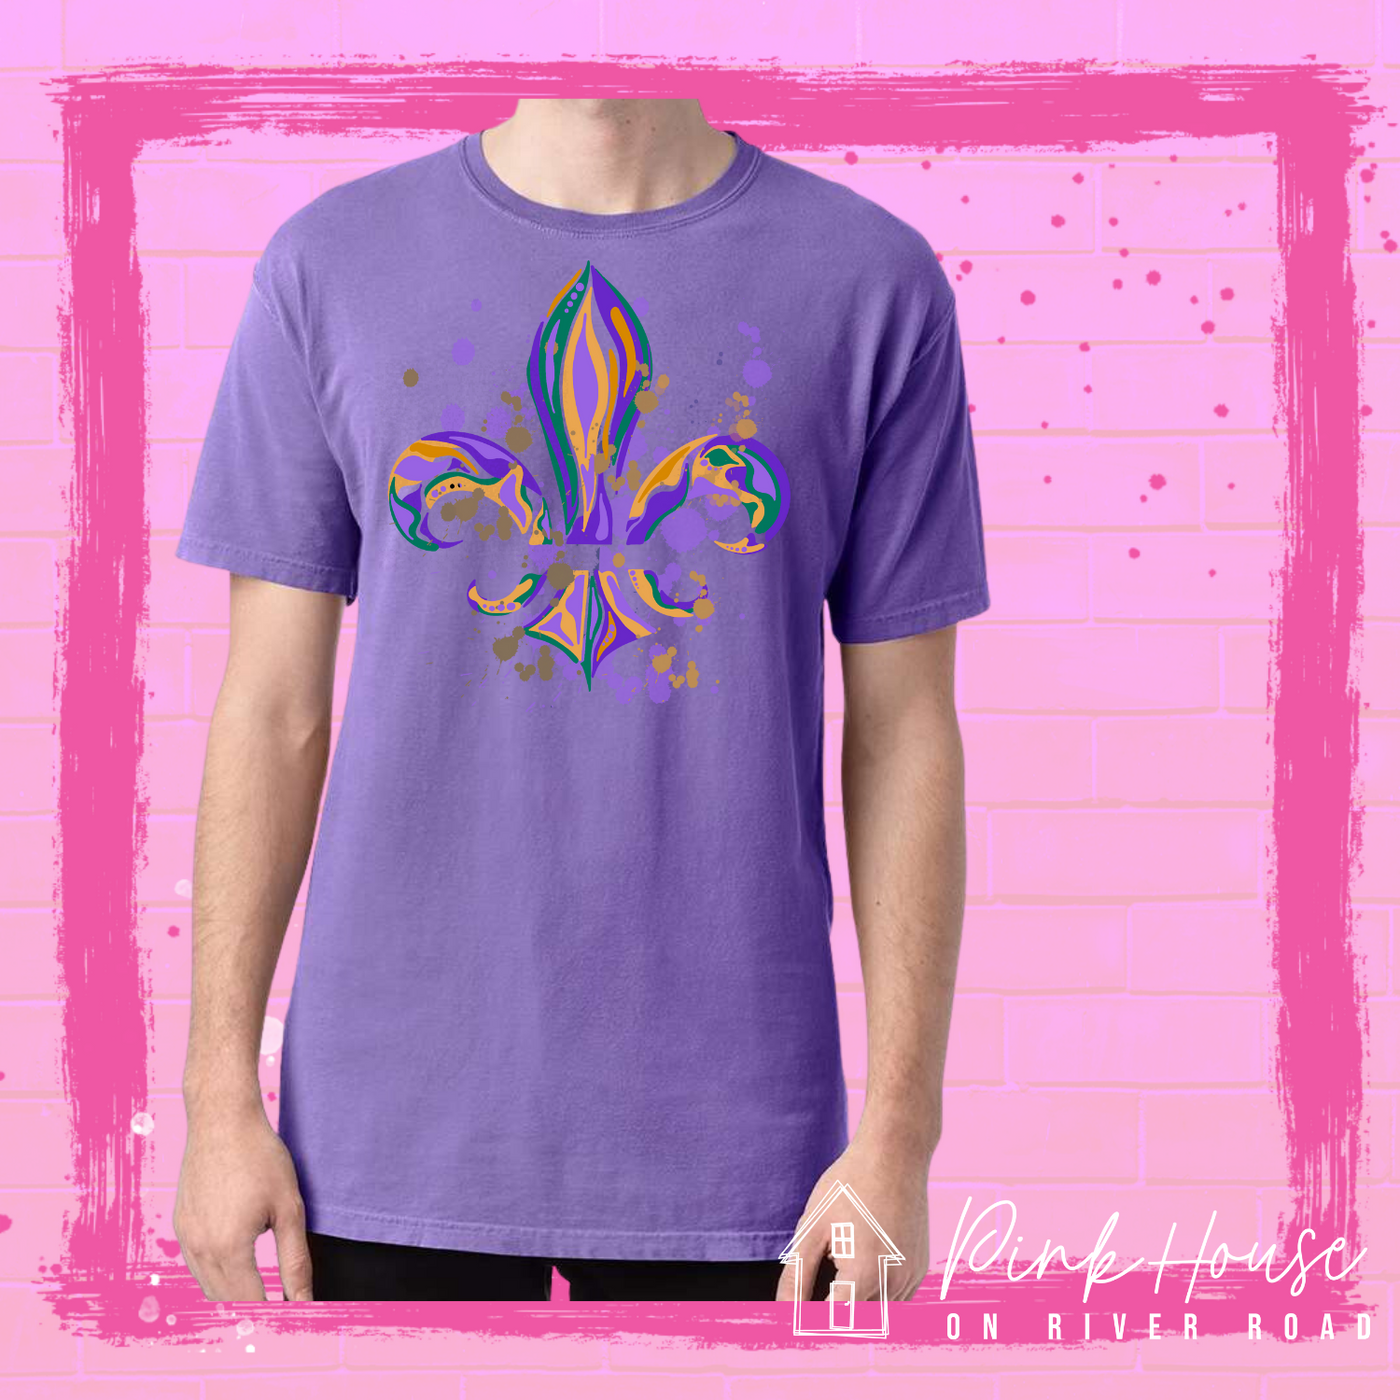 Purple tee with a Fleur de Lis made up of layered green, yellow, and purple with green, yellow and purple colored splatters.